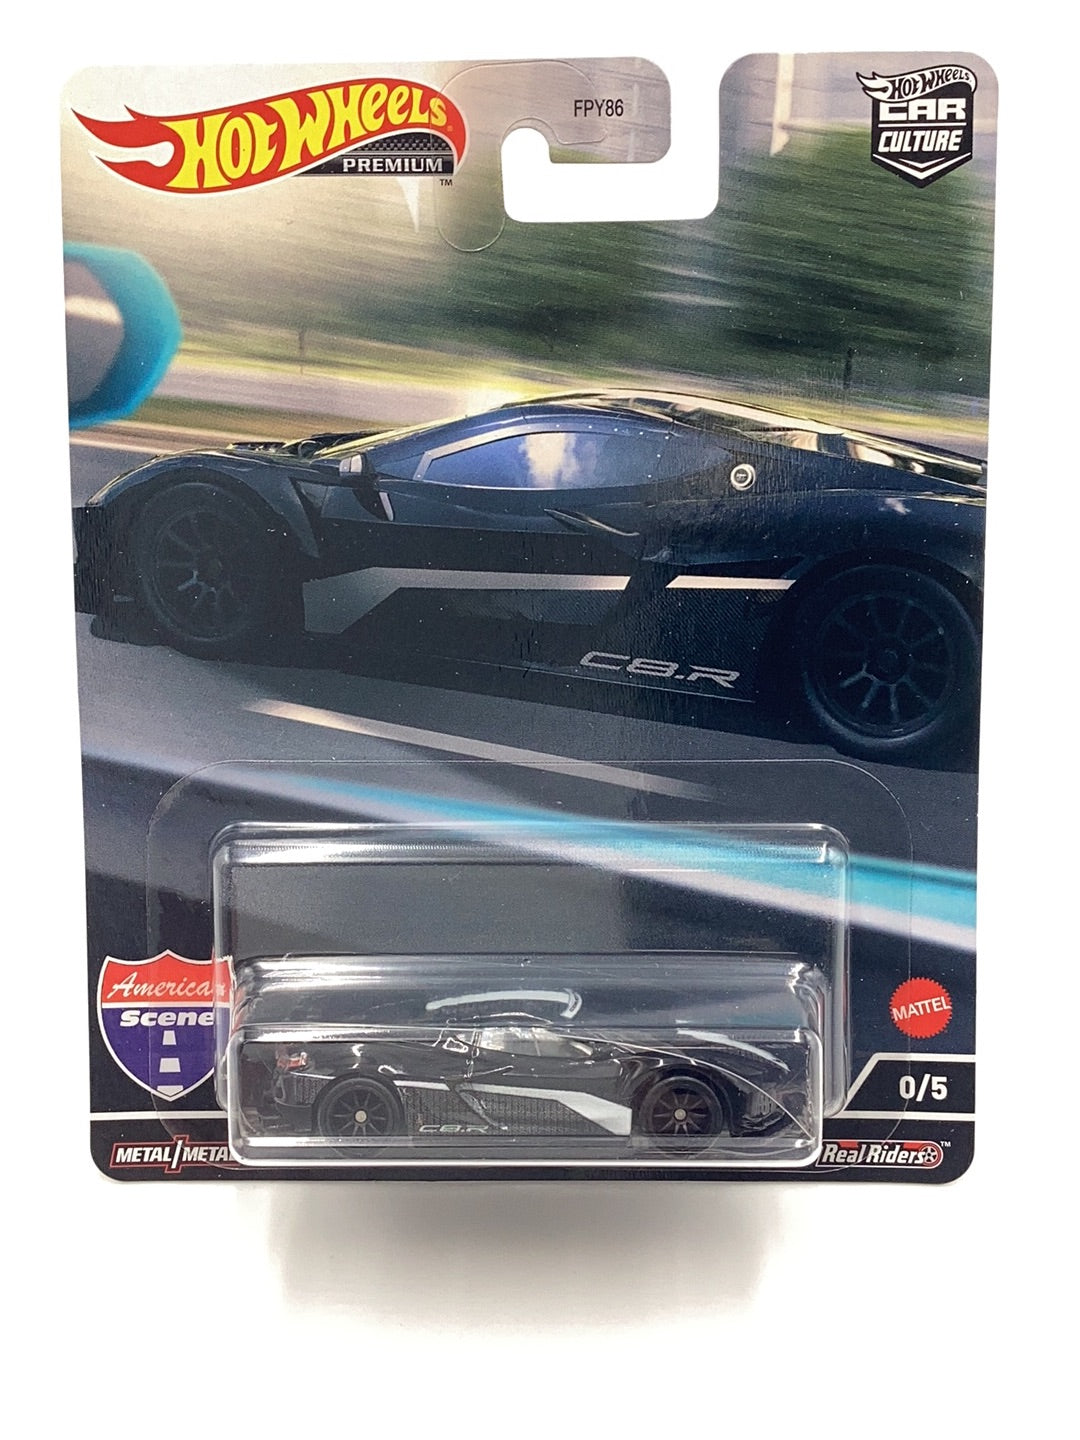 2022 Hot wheels Car Culture American Scene #0 Corvette C8.R Chase with protector